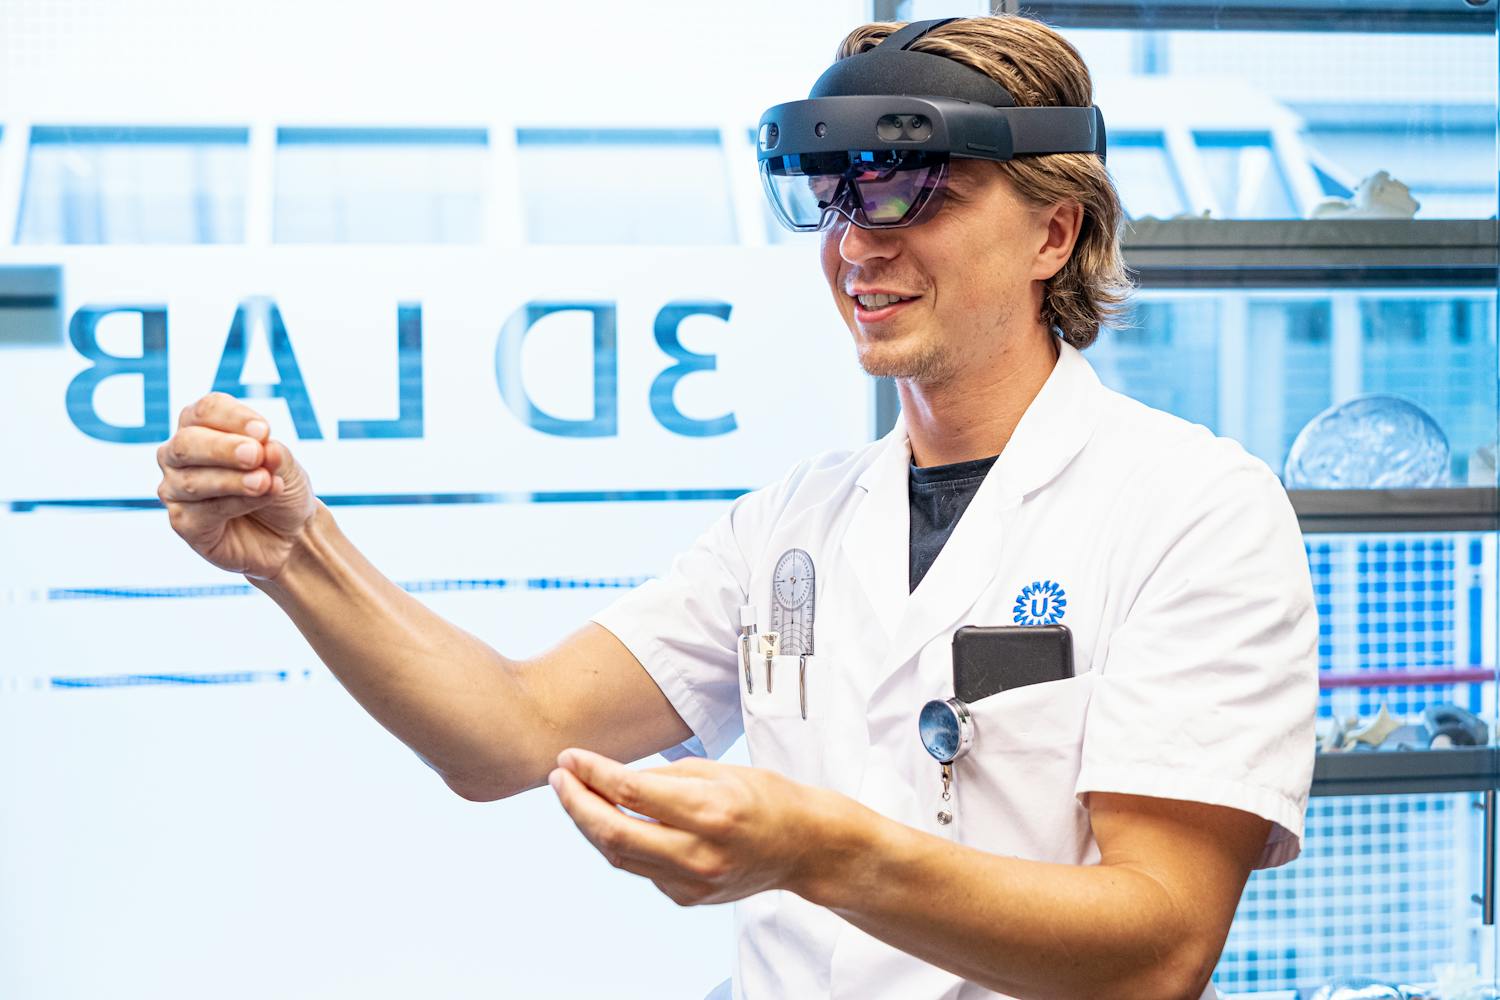 Working with virtual reality: “Erasmus MC can no longer do without it”